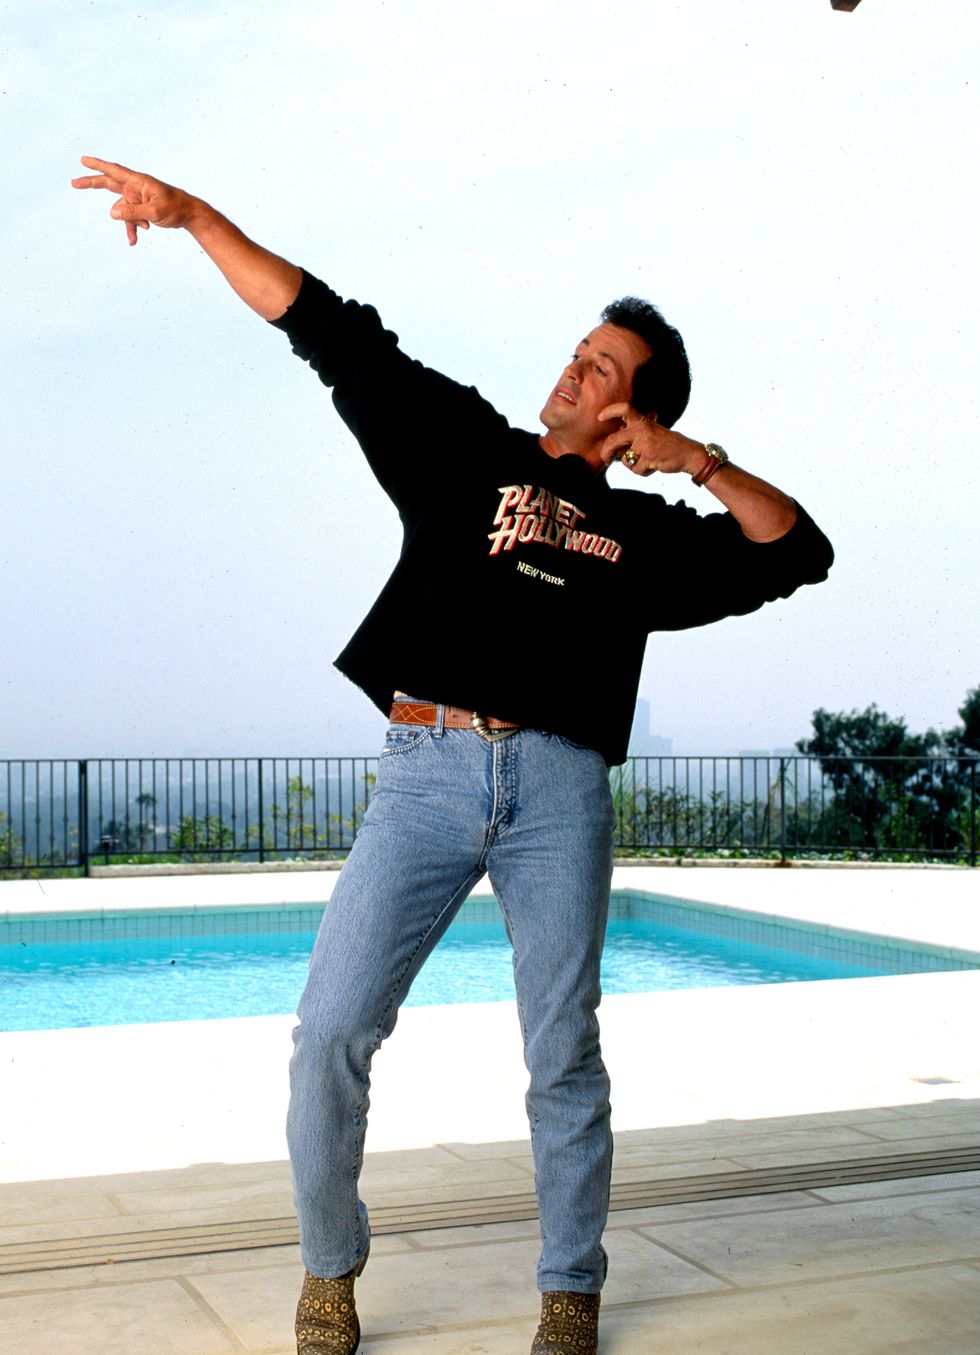 beverly hills, ca may  16, 1991 sylvester stallone beside the pool in his  beverly hills home celebrating the opening of the chain of restaurants called planet hollywood may 16, 1991, beverly hills, california photo by paul harrisgetty images